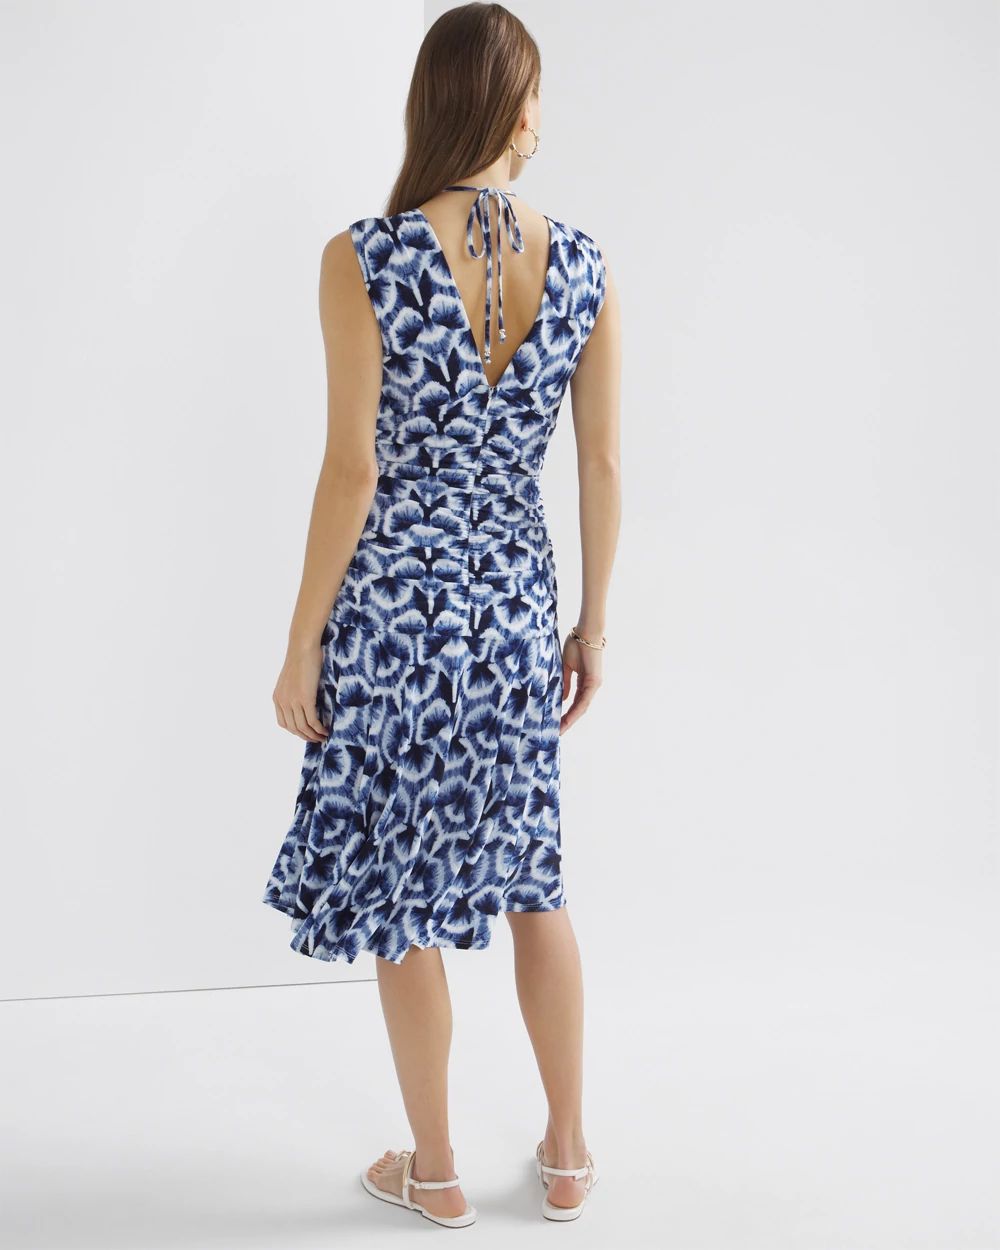 Petite Ruched Tie-Shoulder Midi Dress click to view larger image.